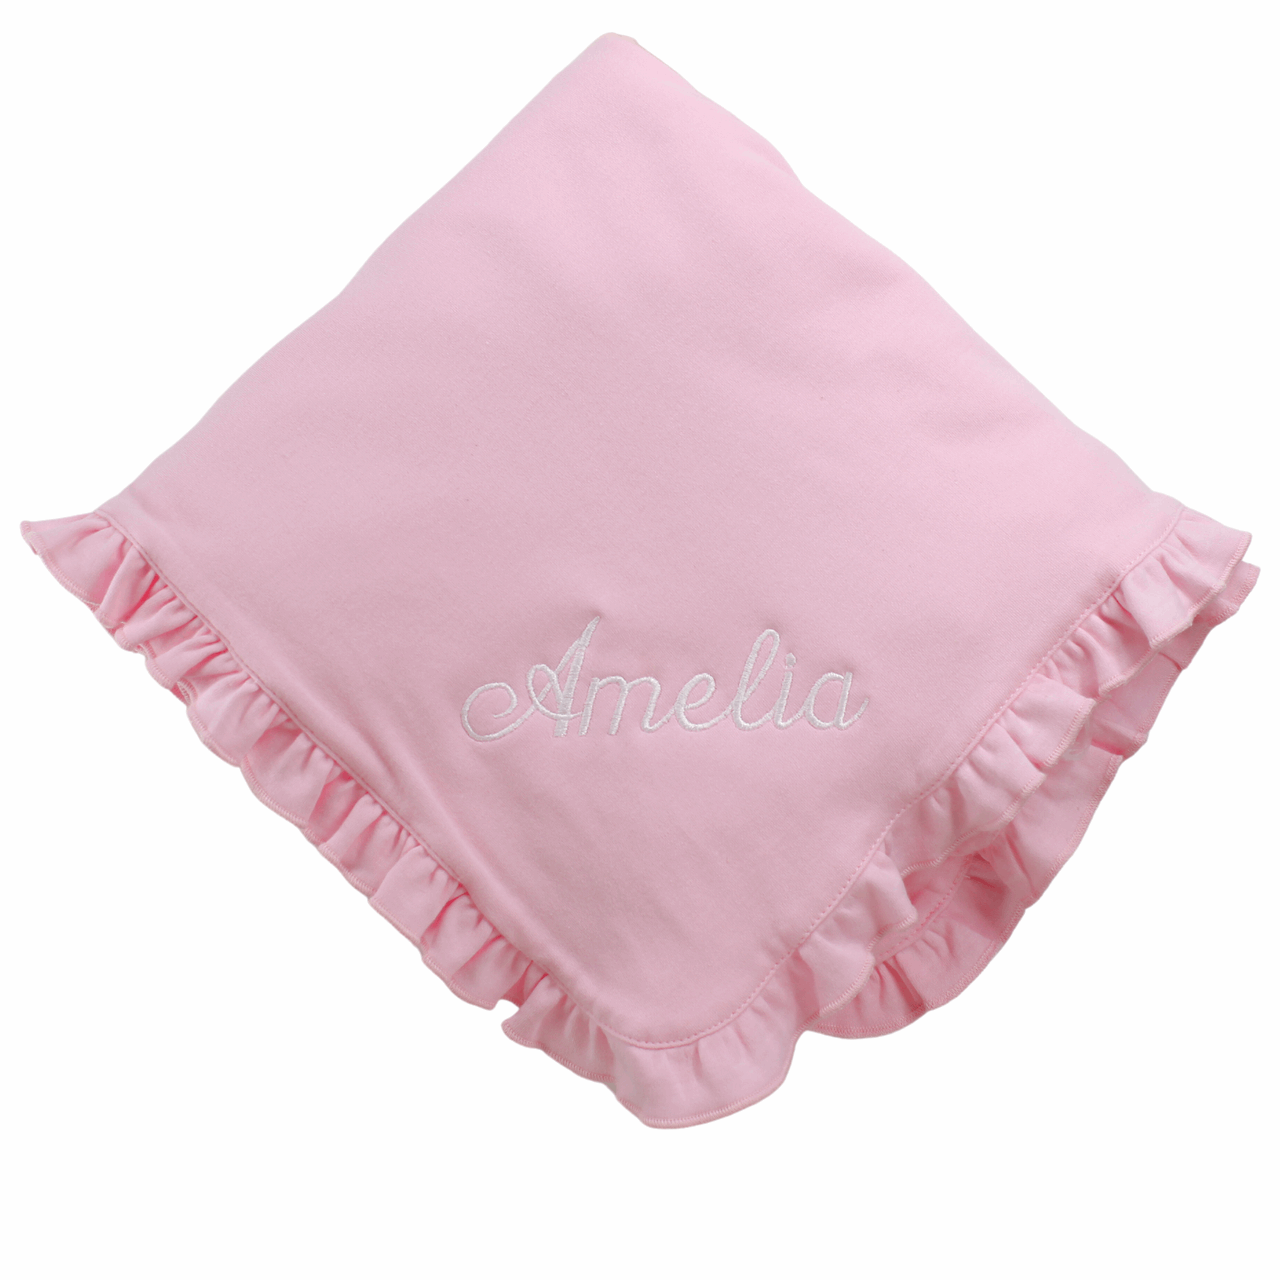 Baby Girl Blanket Pink with Ruffle Trim